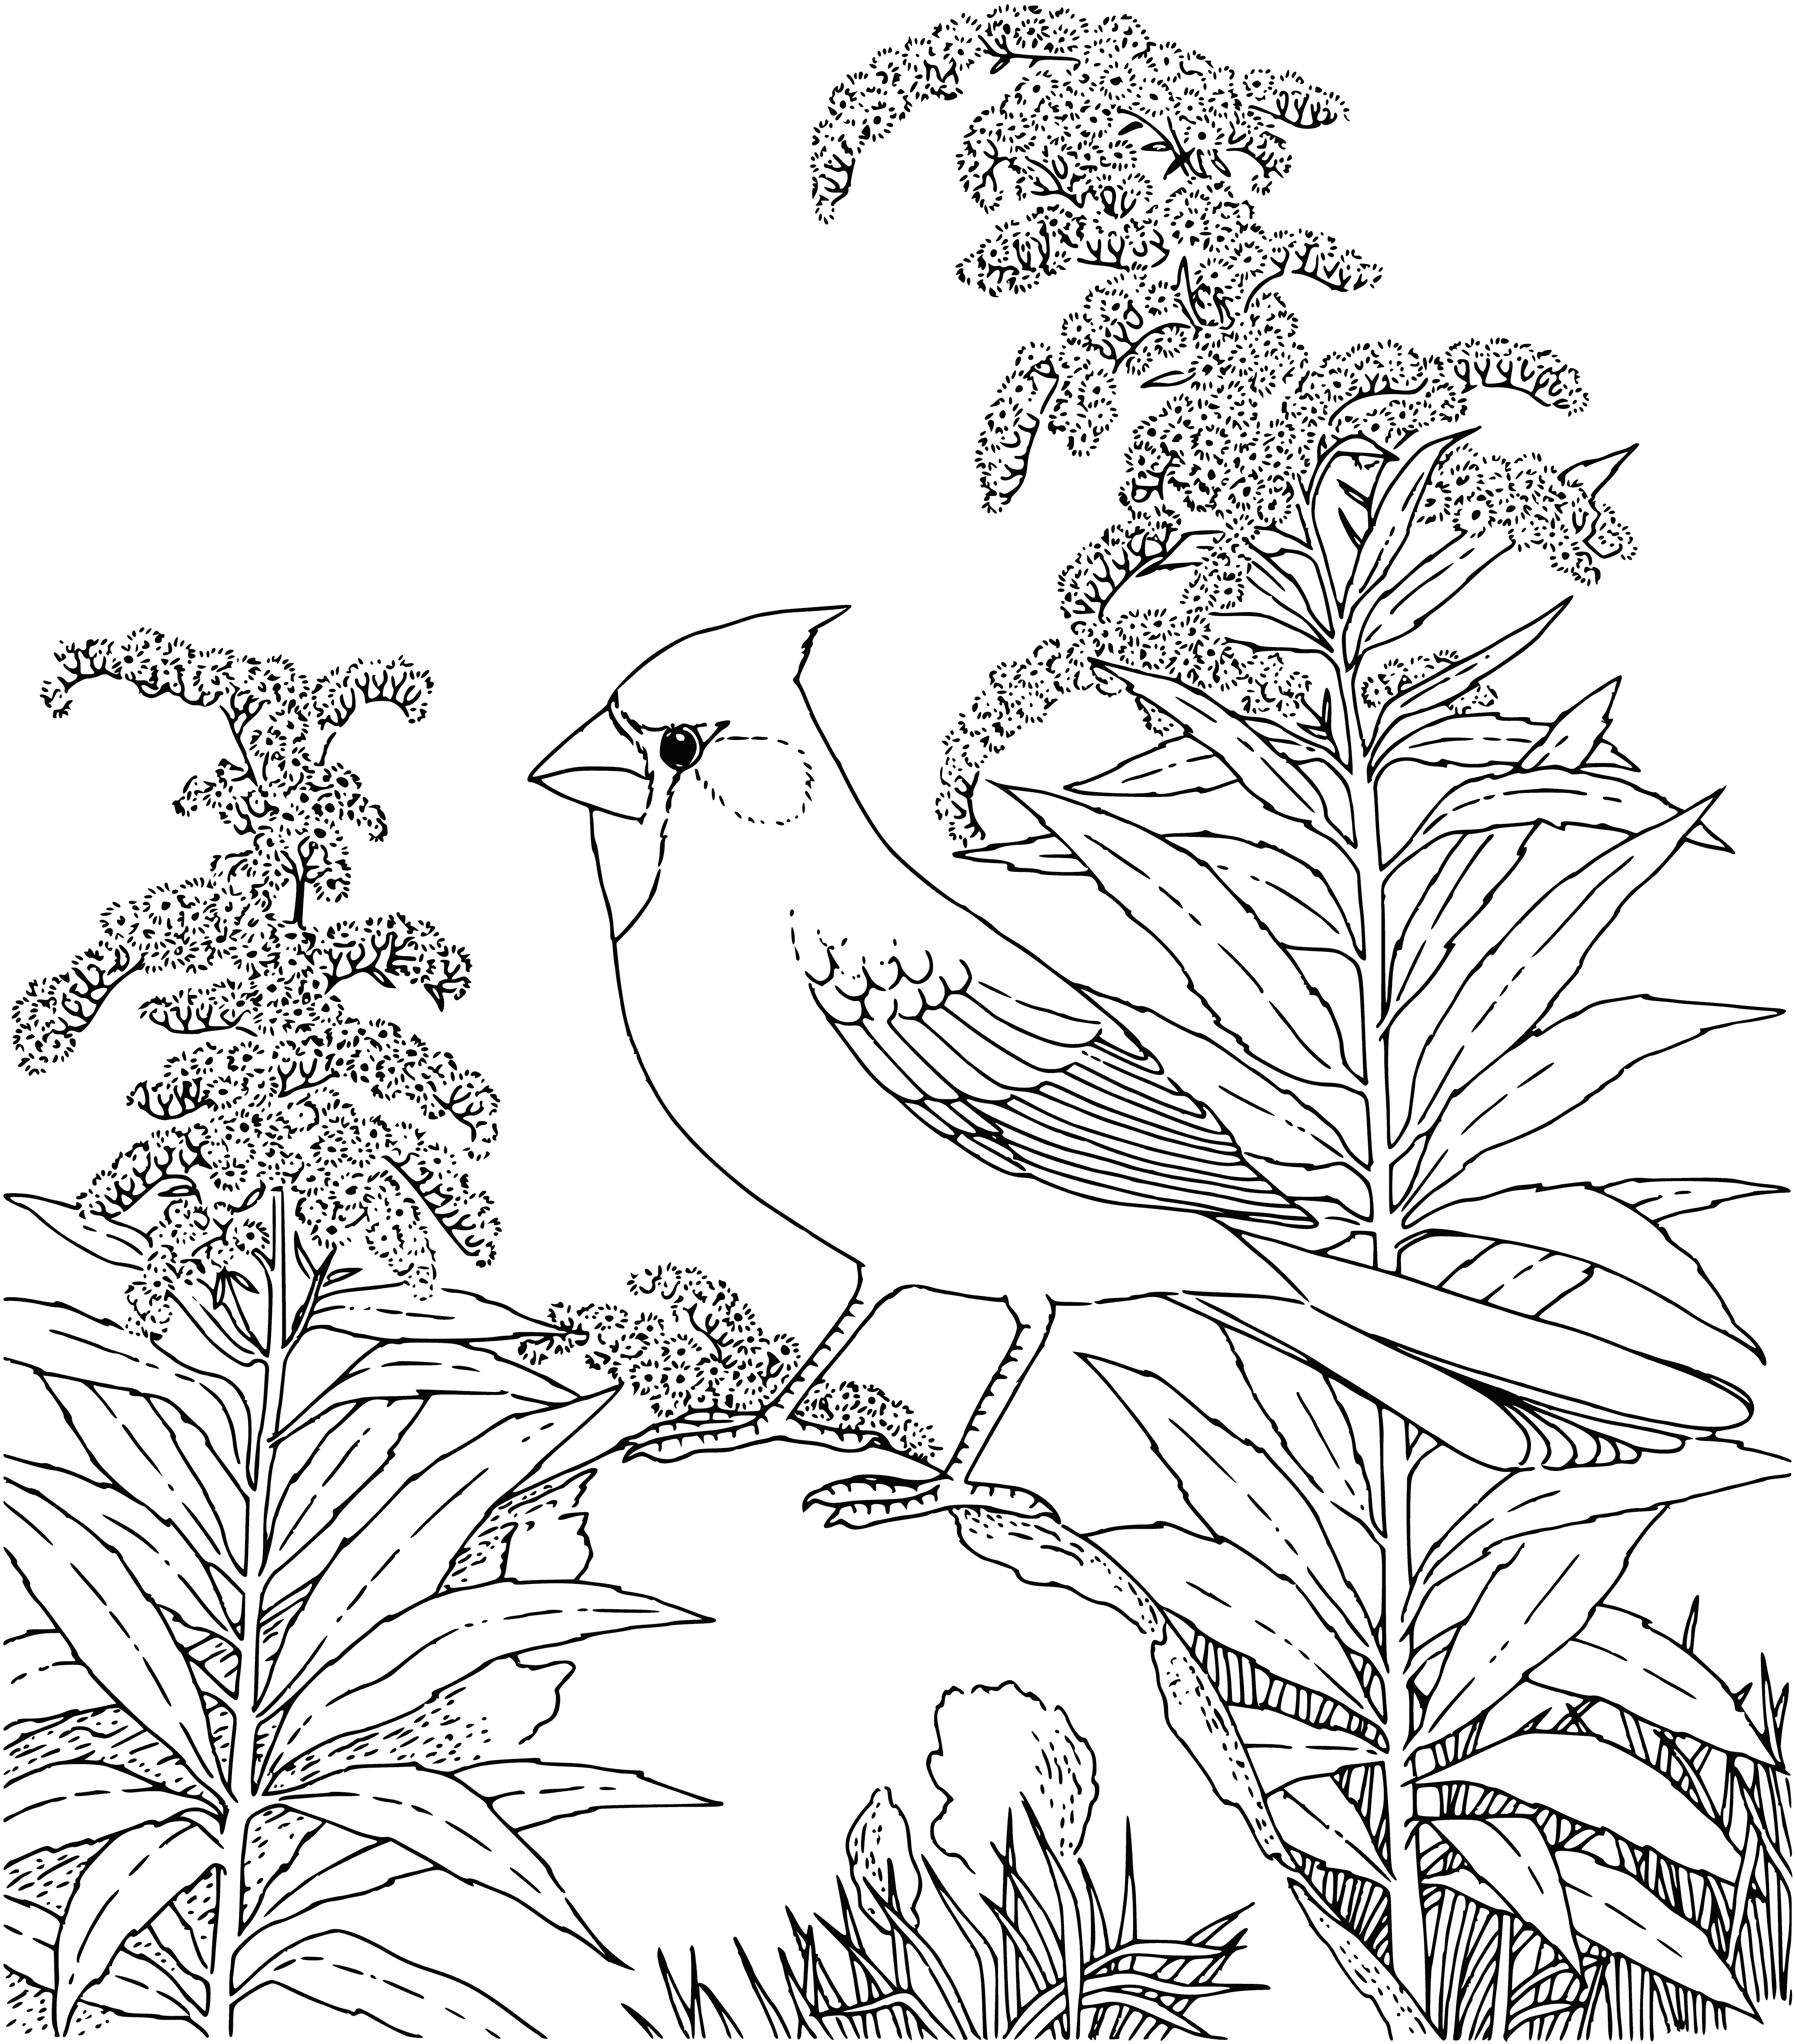 coloring page: Large red bird with black beak/eyes, crest, and long tail perched on branch. #birdwatching